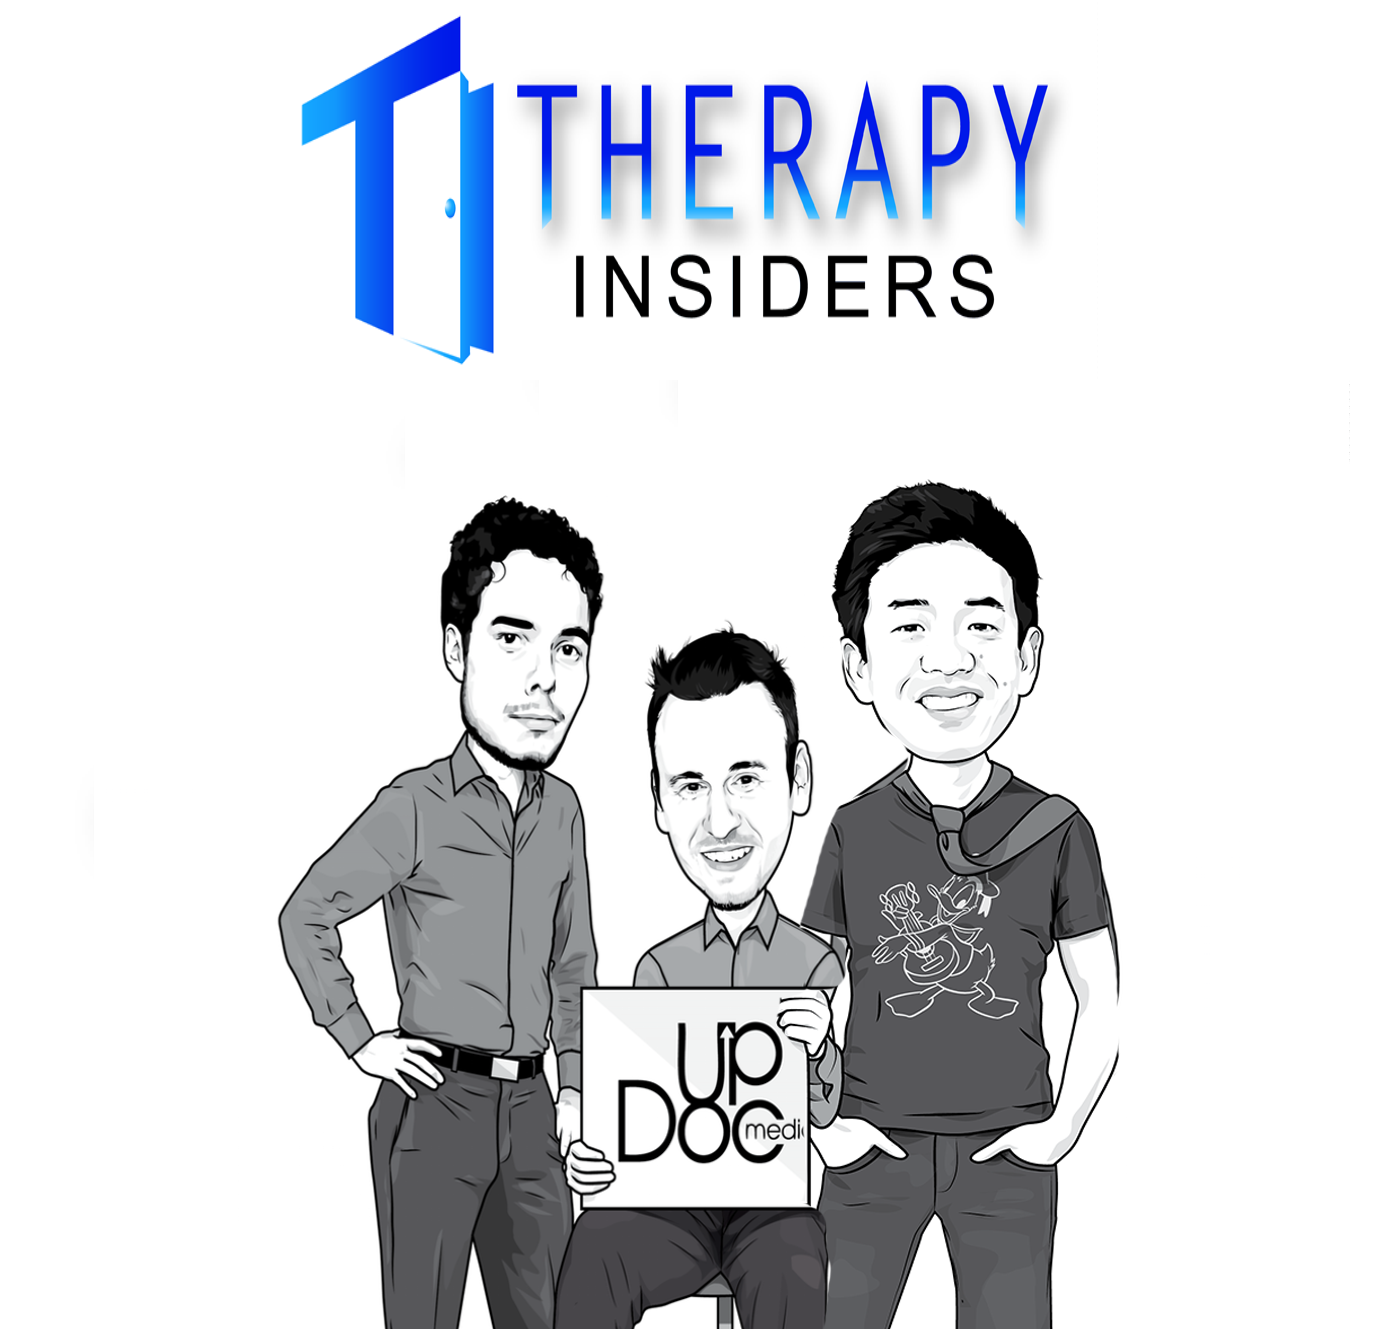 The Therapy Insiders podcast with Dr. Gene Shirokobrod, Dr. Joe Palmer, Dr. Ben Fung — talking the business of rehab therapy and beyond along with interviews of best selling authors and industry leaders, inside and outside of the healthcare industry.